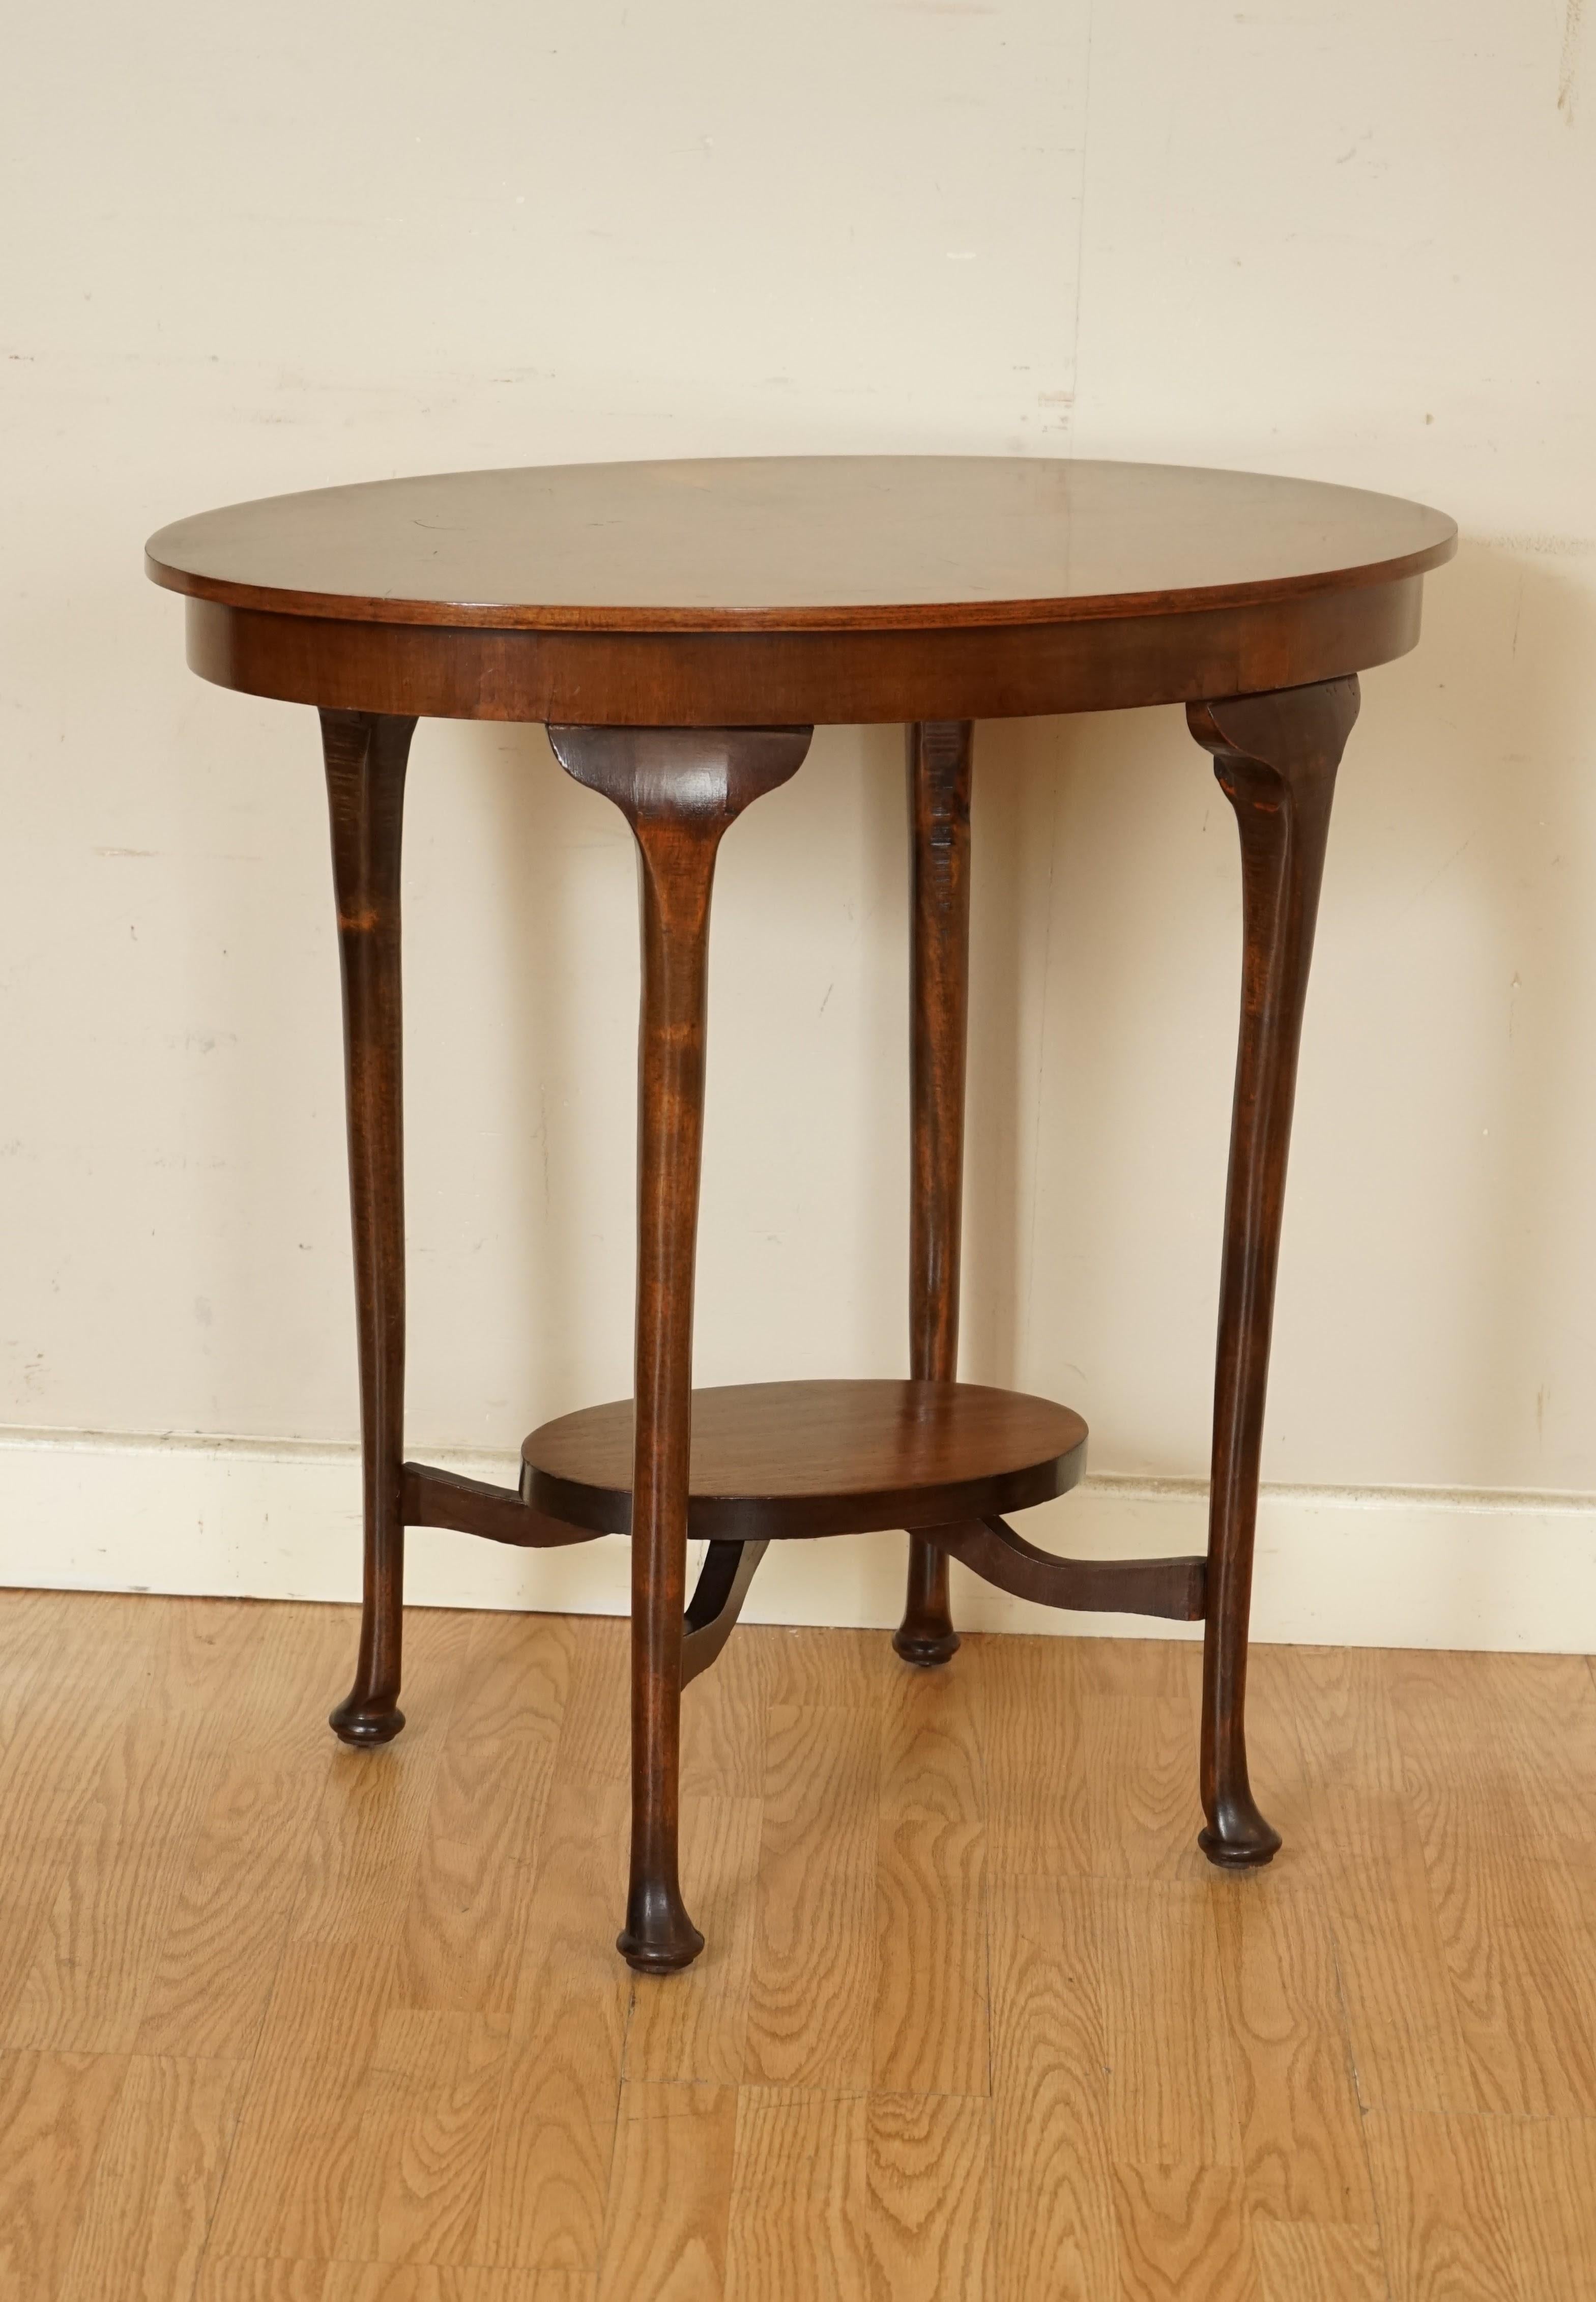 We are so excited to present to you this Lovely Vintage Oval End Table. 

Please carefully look at the pictures to see the condition before purchasing as they form part of the description. If you have any questions please message us.